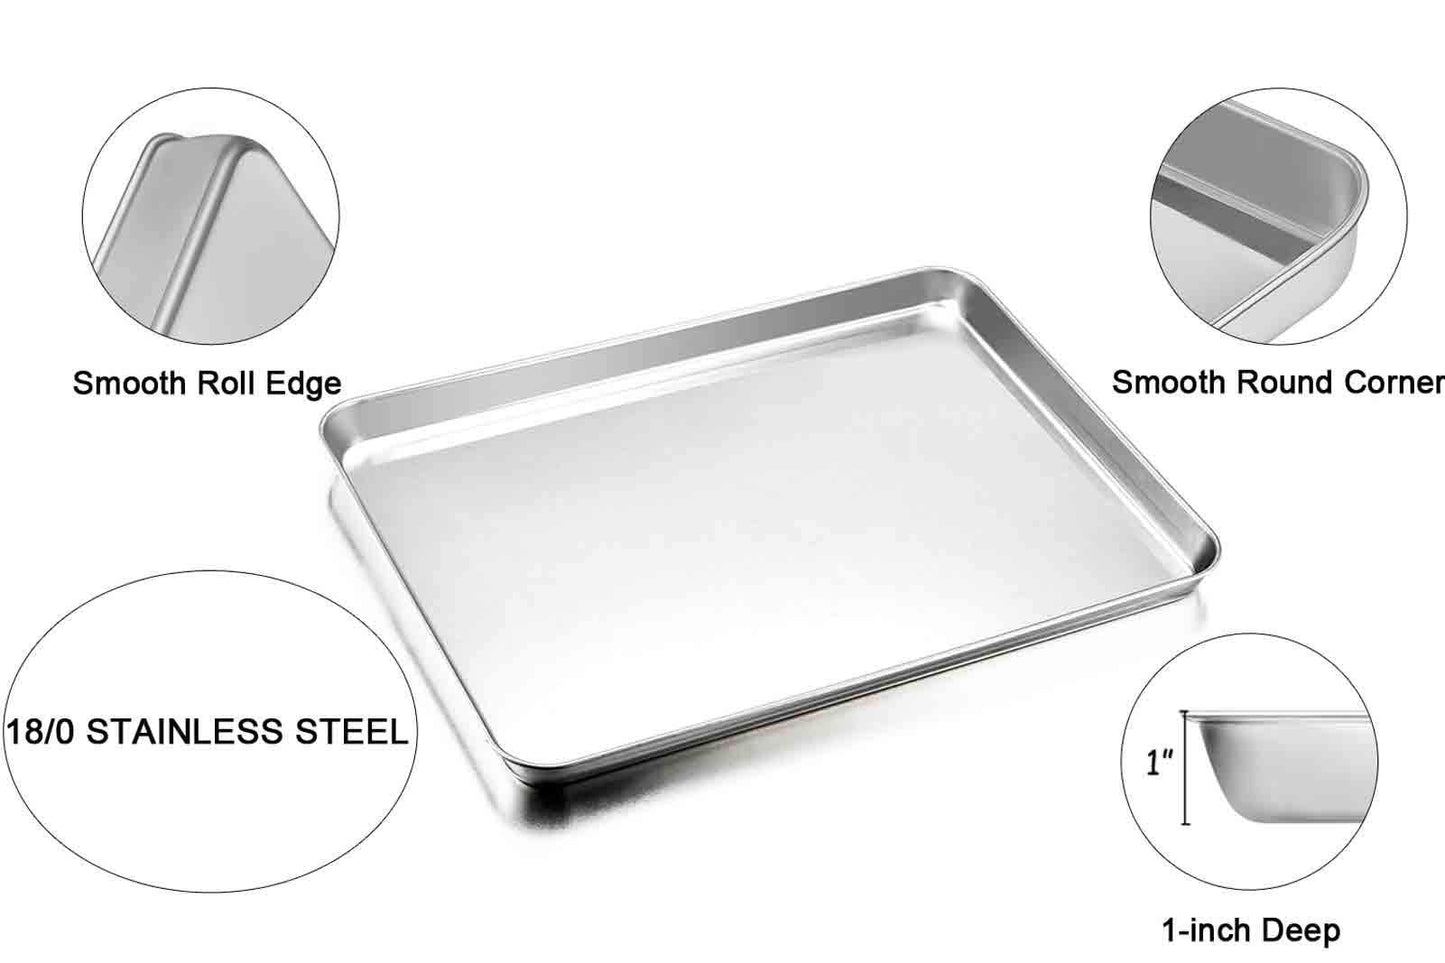 TeamFar Baking Sheet with Rack Set of 8, Cookie Sheet Baking Pans Stainless Steel Bakeware with Cooling Rack Set, Non Toxic & Healthy, Mirror Finish & Rust Free, Easy Clean & Dishwasher Safe - CookCave